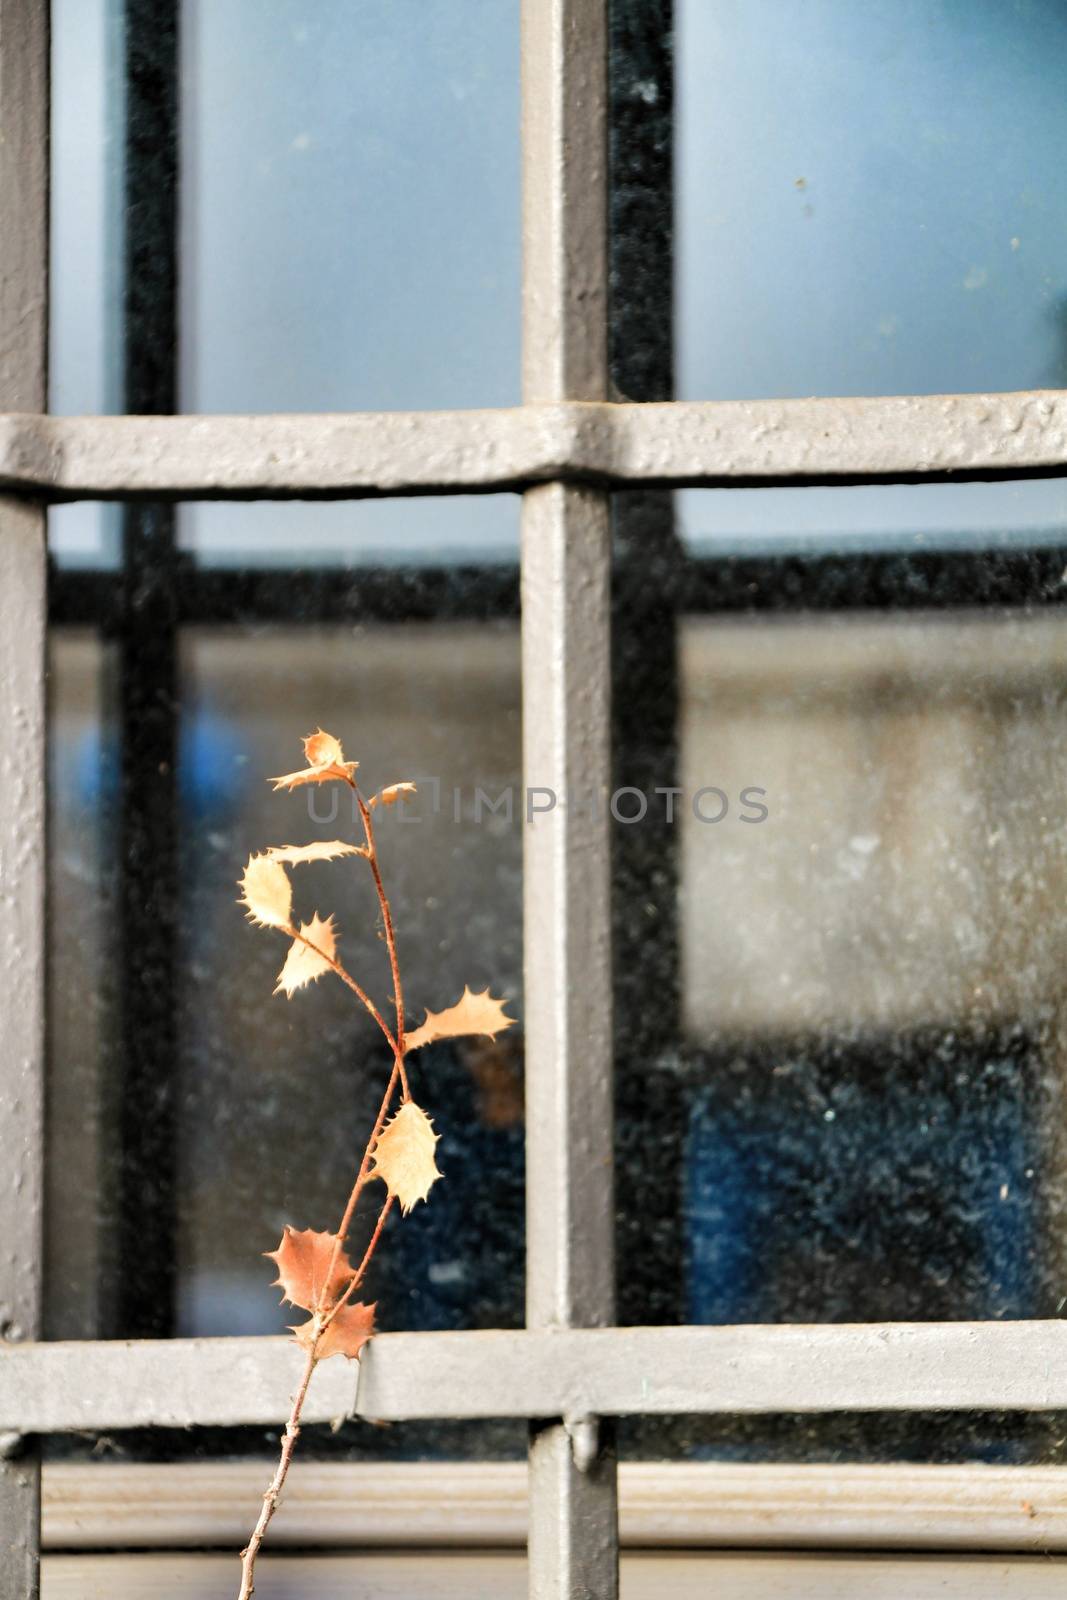 Dry and dead plant in a latticed window